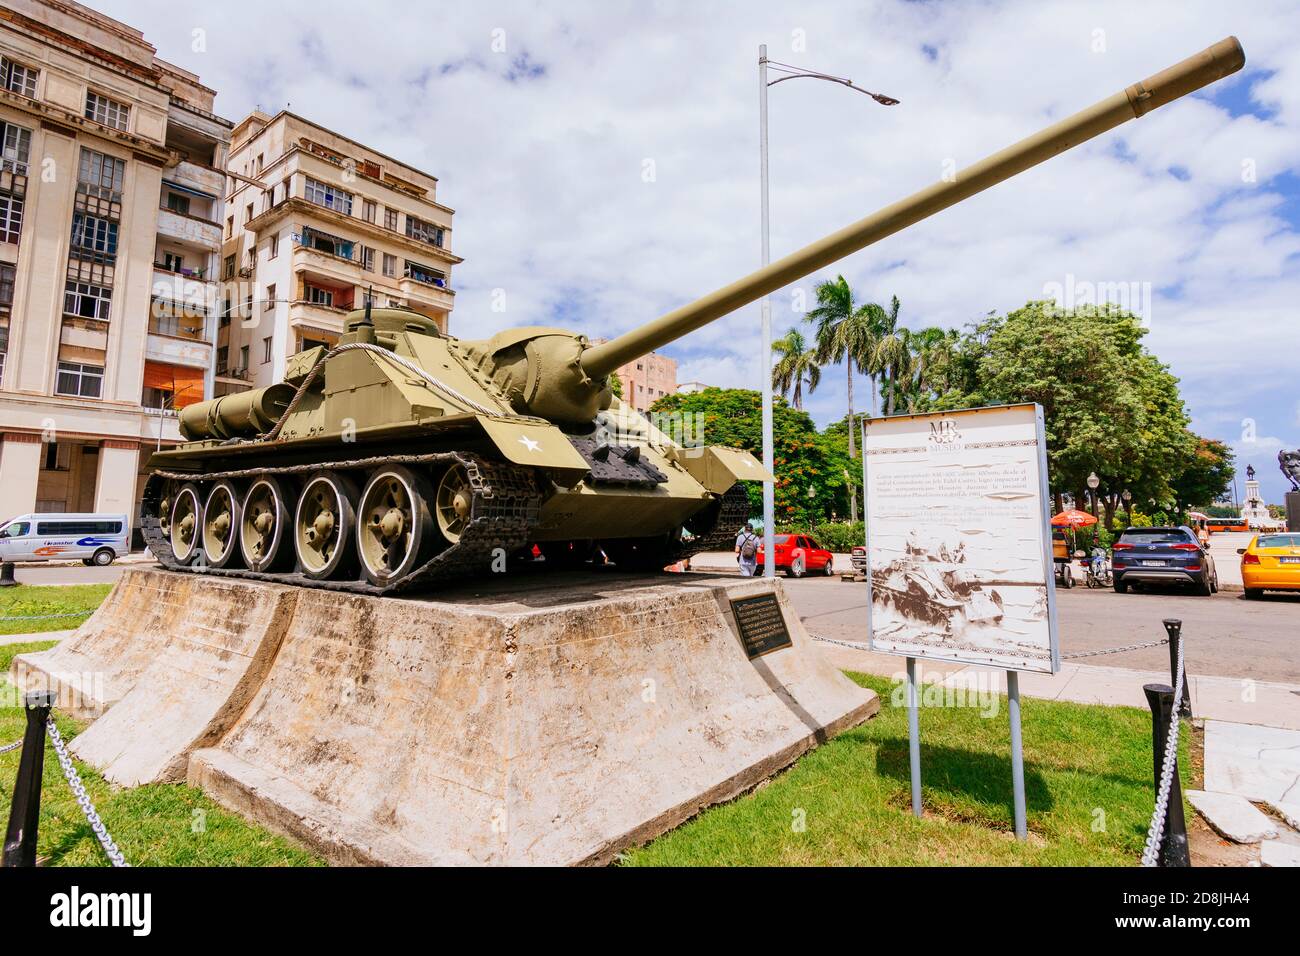 Russian tank outside the Museum of the Revolution. SAU-100 autopropelled cannon, 100mm caliber, from which Commander in Chief Fidel Castro shot US ves Stock Photo